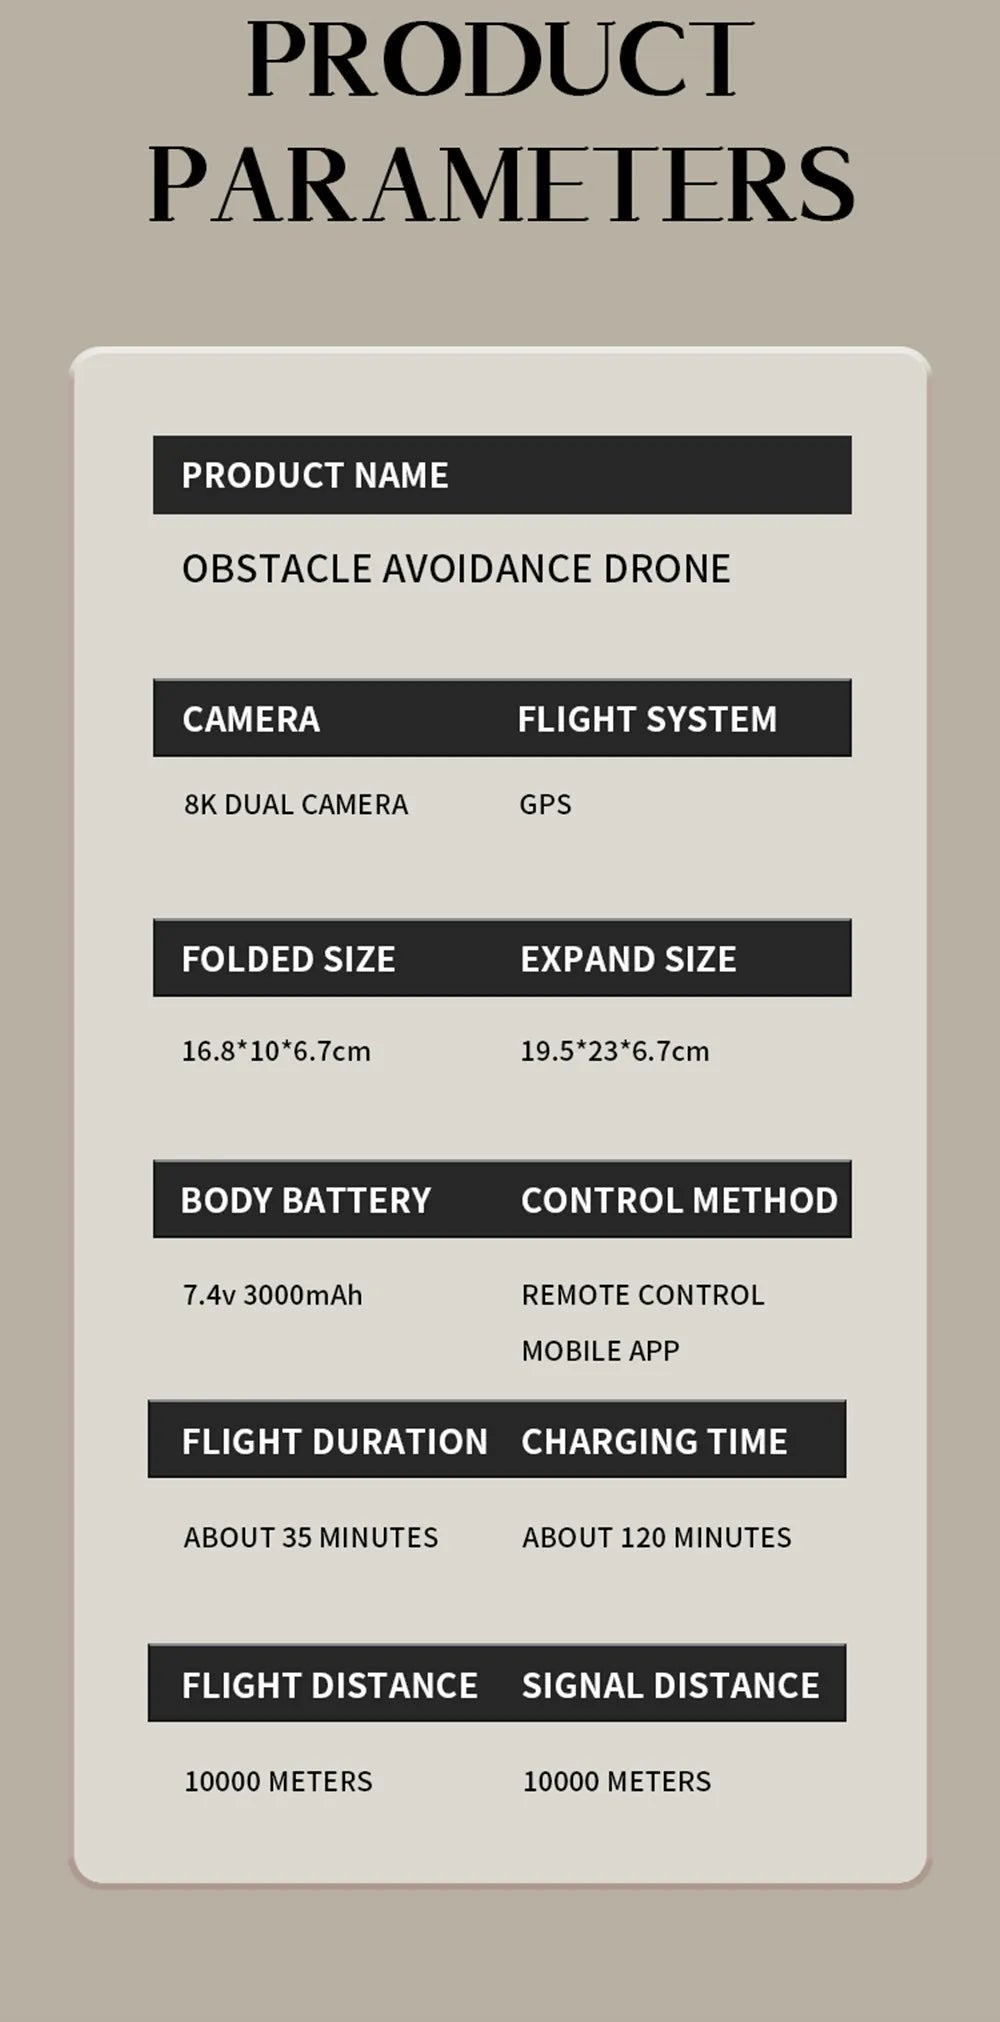 X38 PRO Drone, OBSTACLE AVOIDANCE DRONE CAMERA FLIGHT SYSTEM